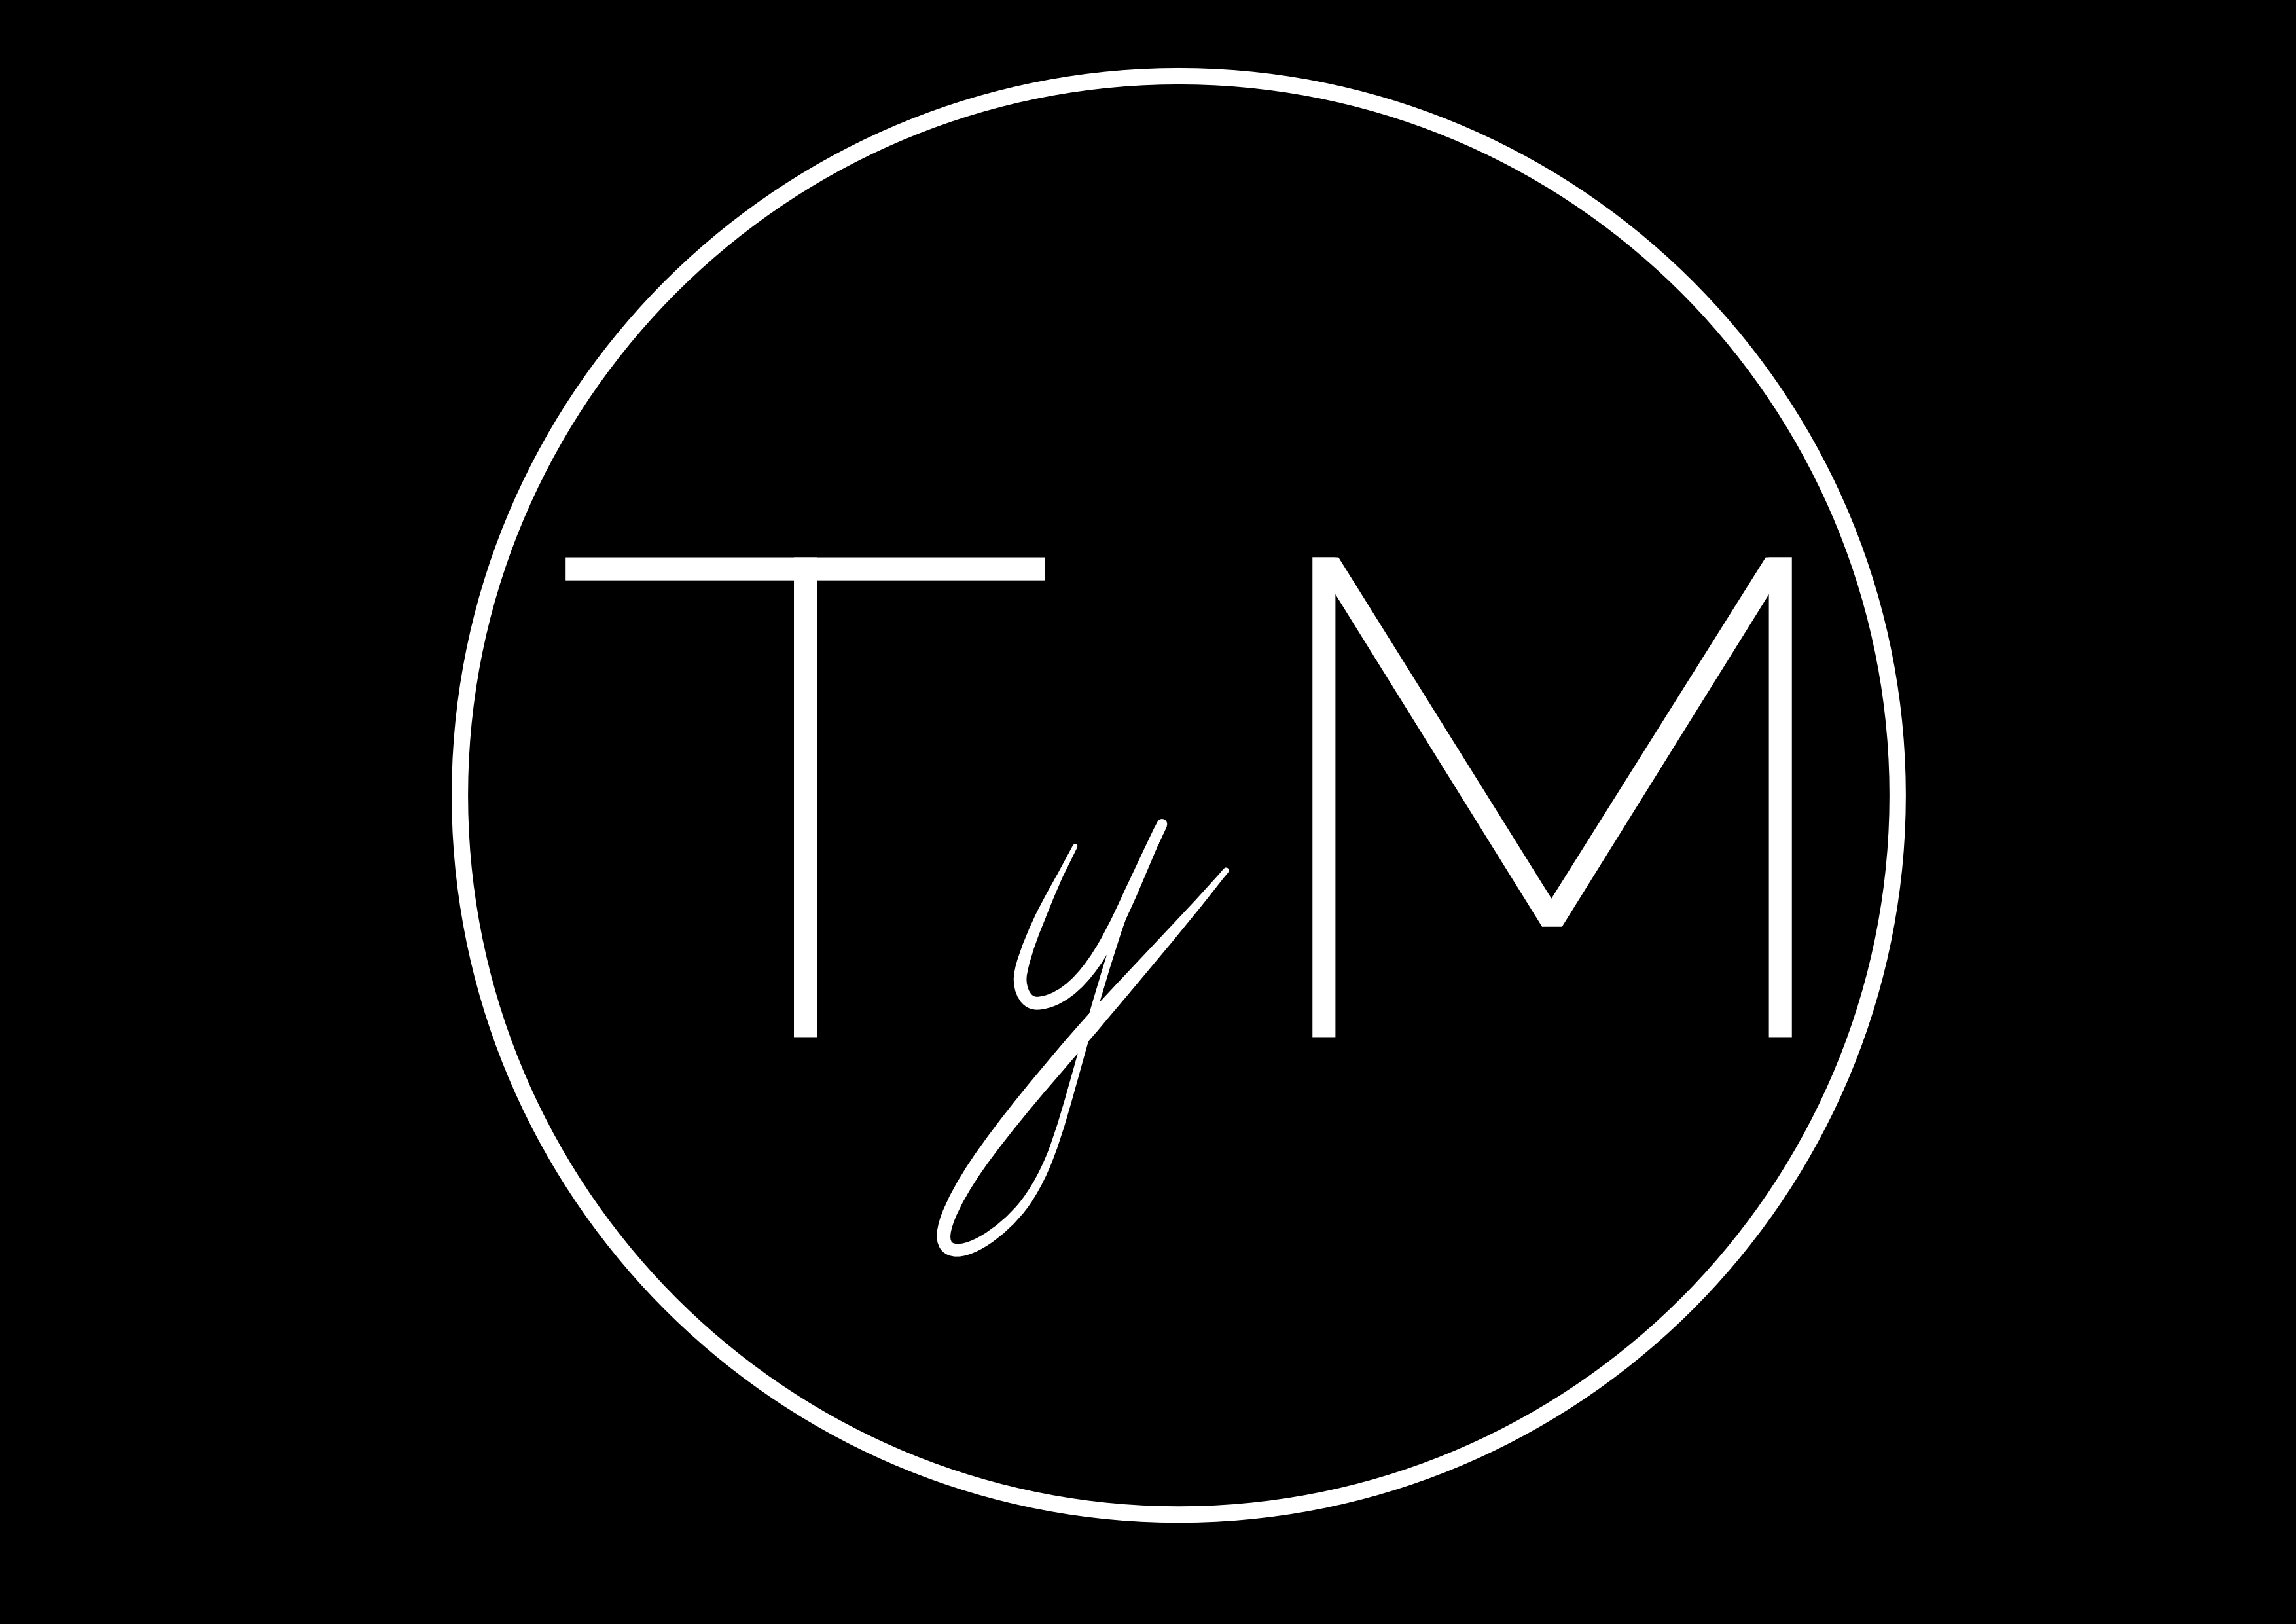 Tym - Immobilier by kw